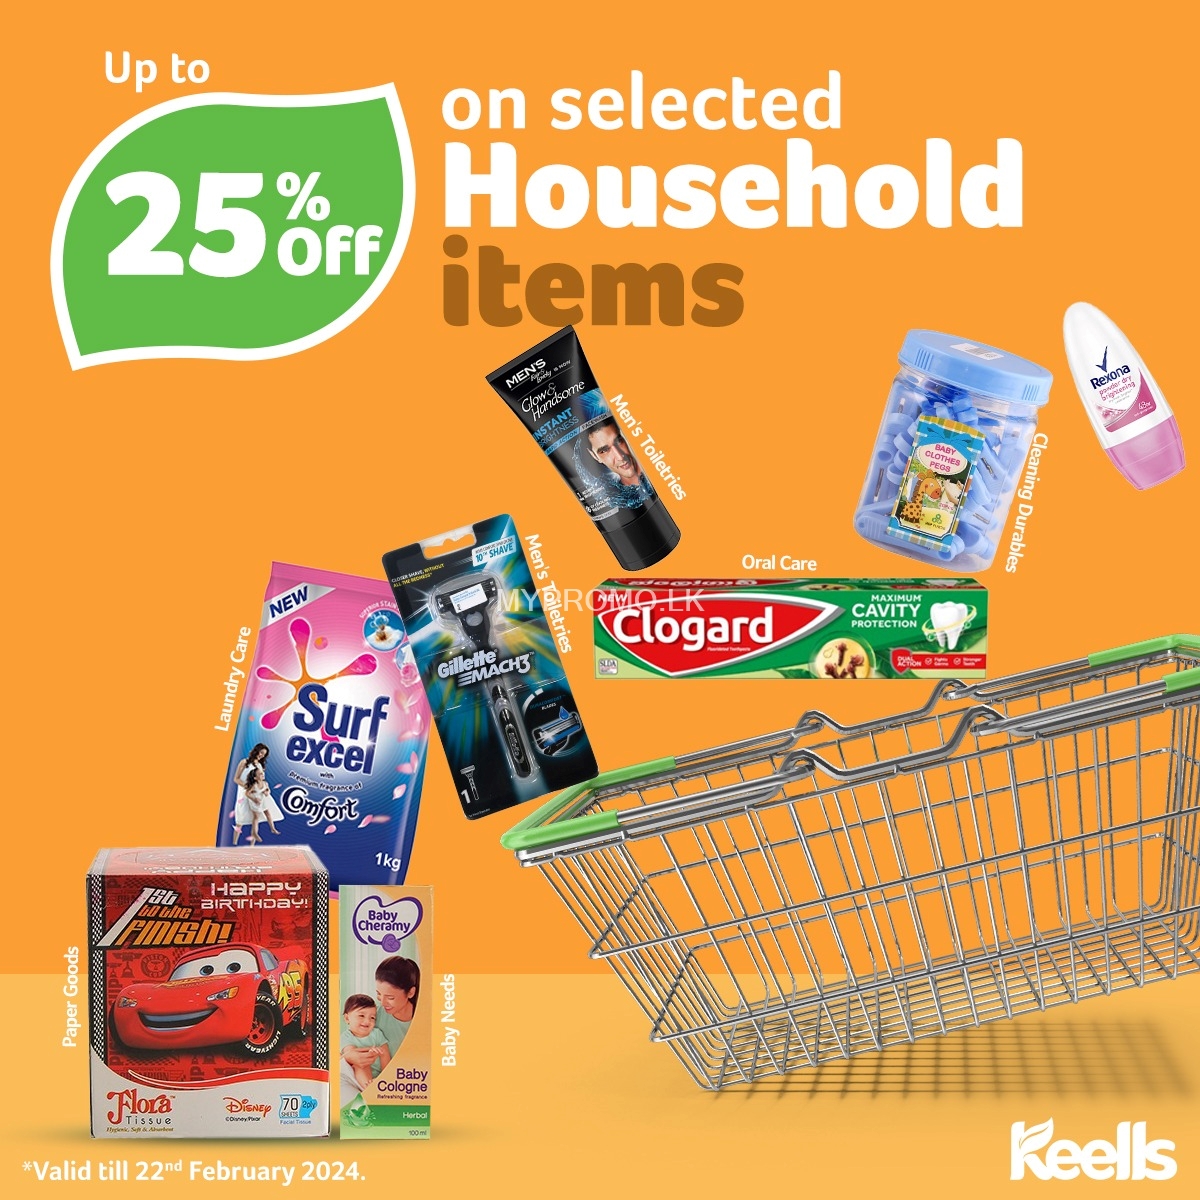 Get up to 25% off on selected Household Items at Keells